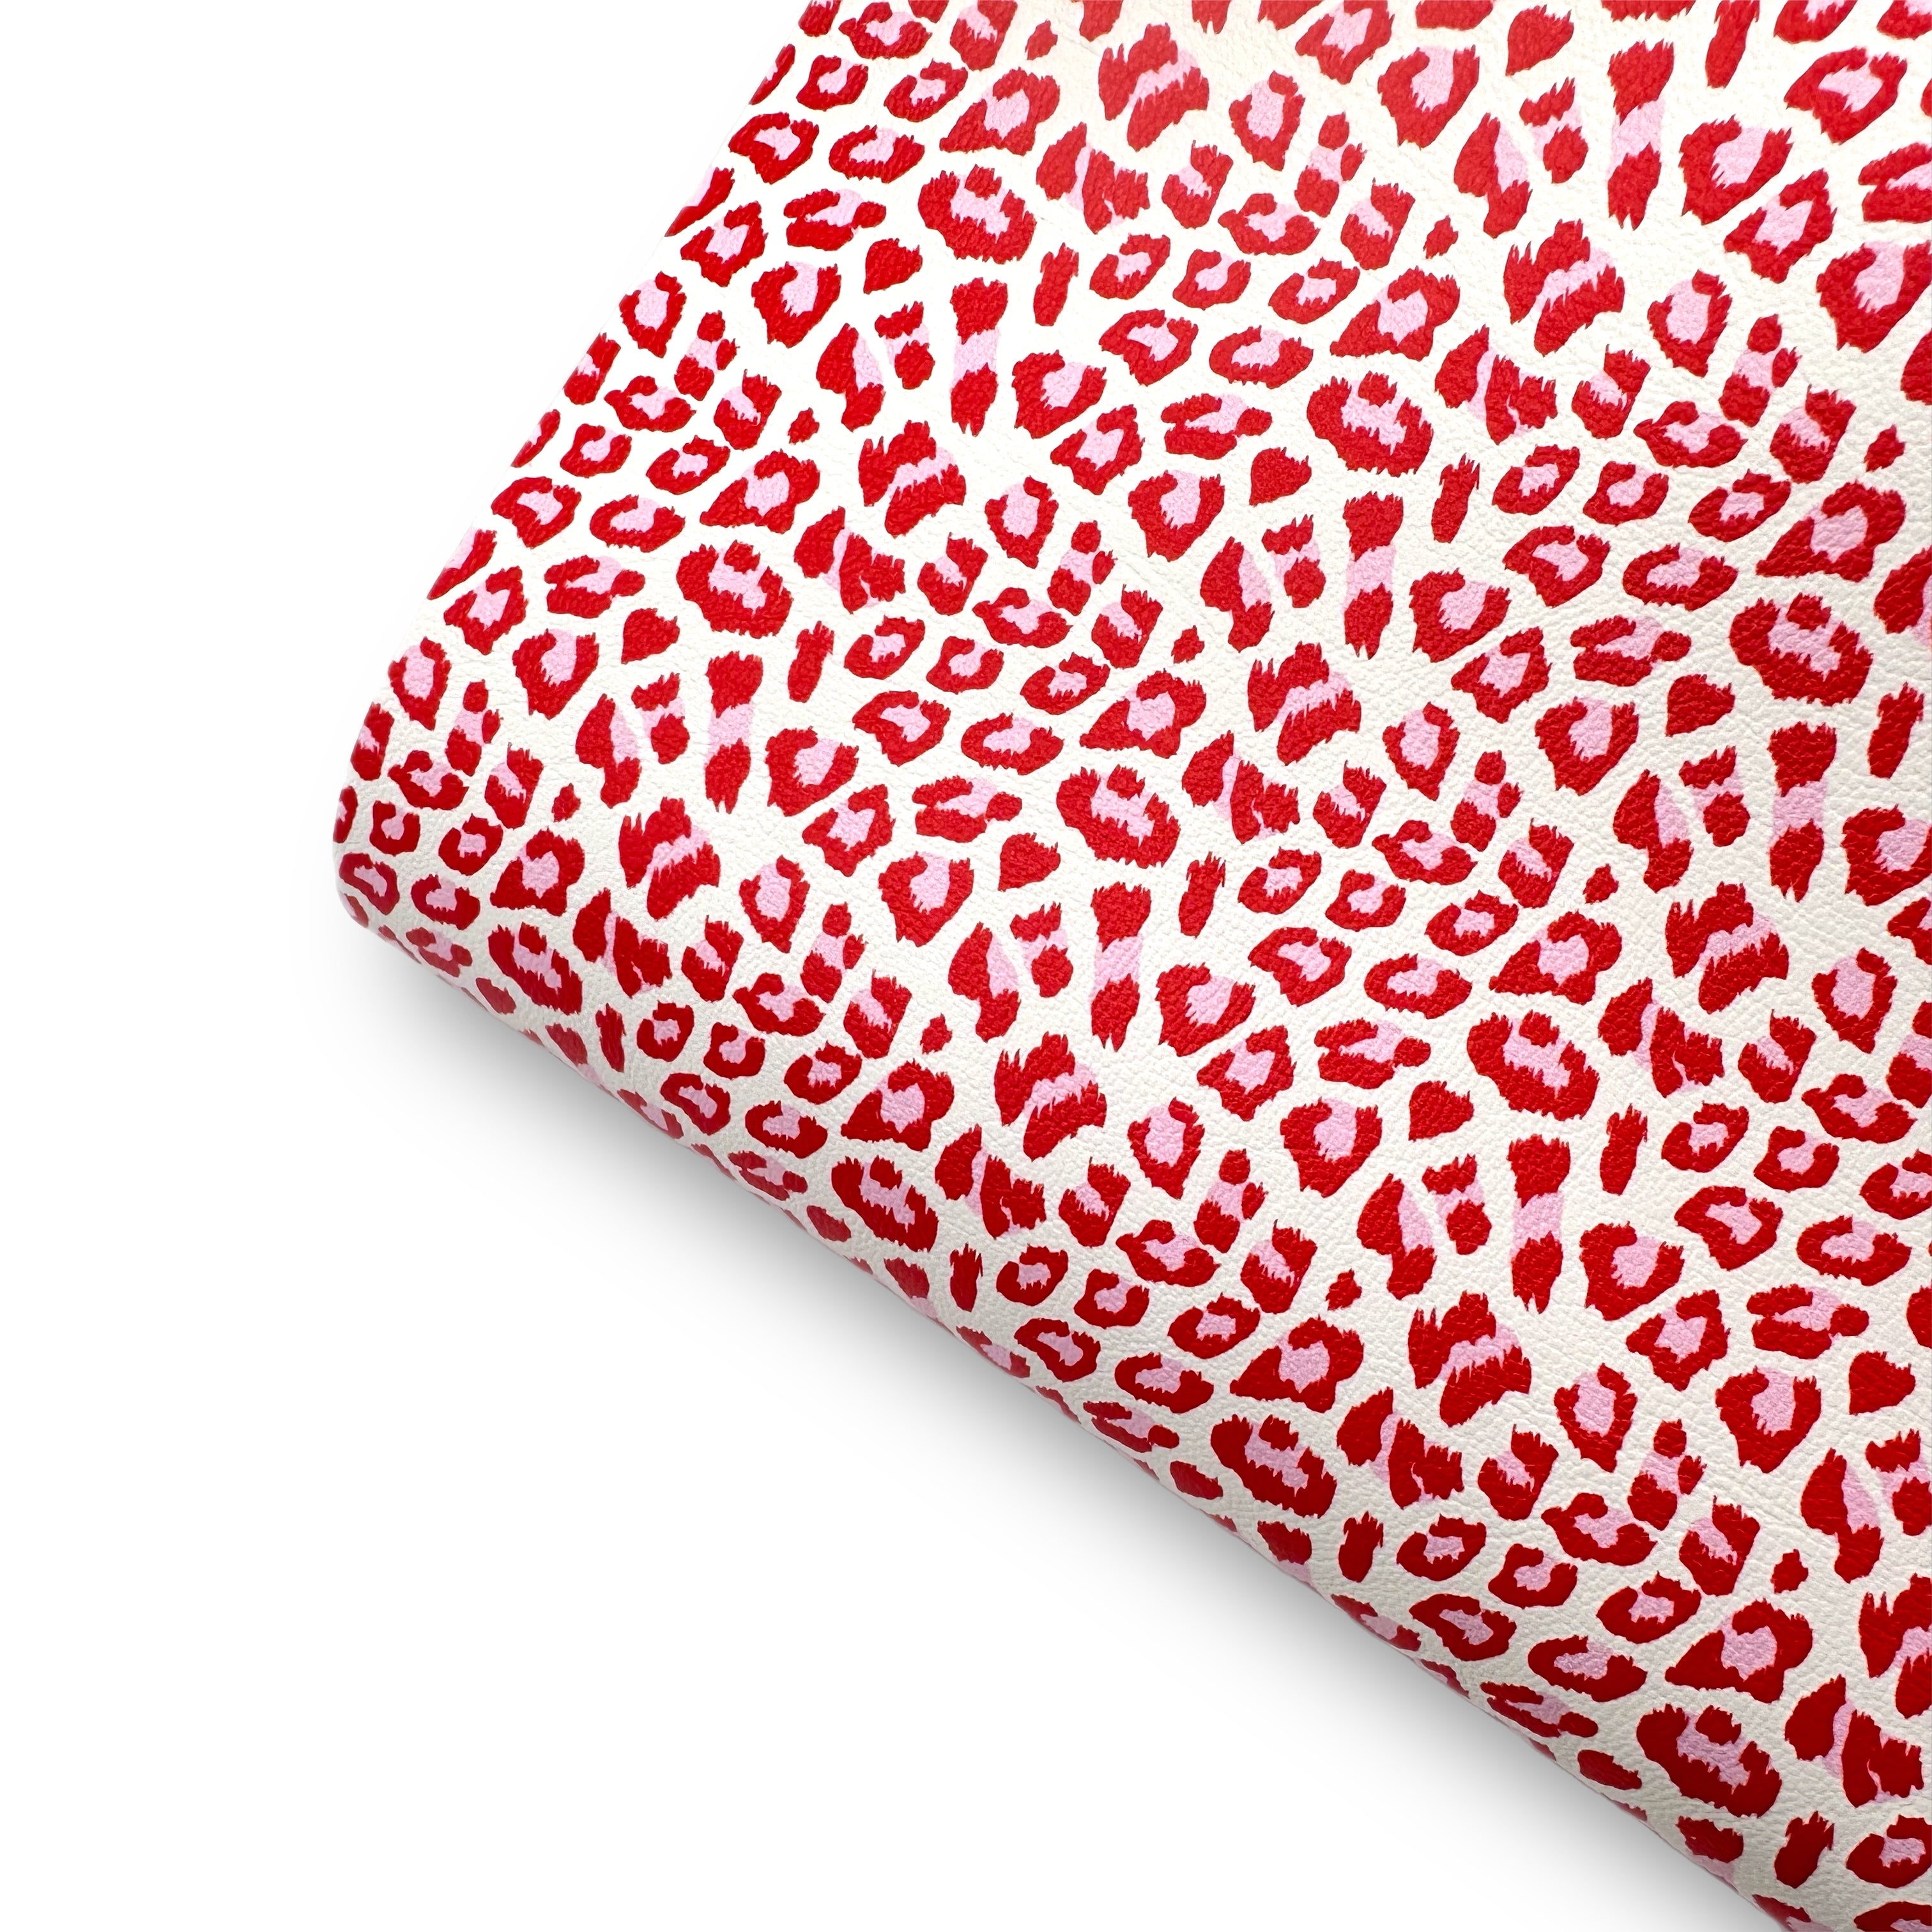 Lurvly Leopard Premium Faux Leather Fabric Sheets